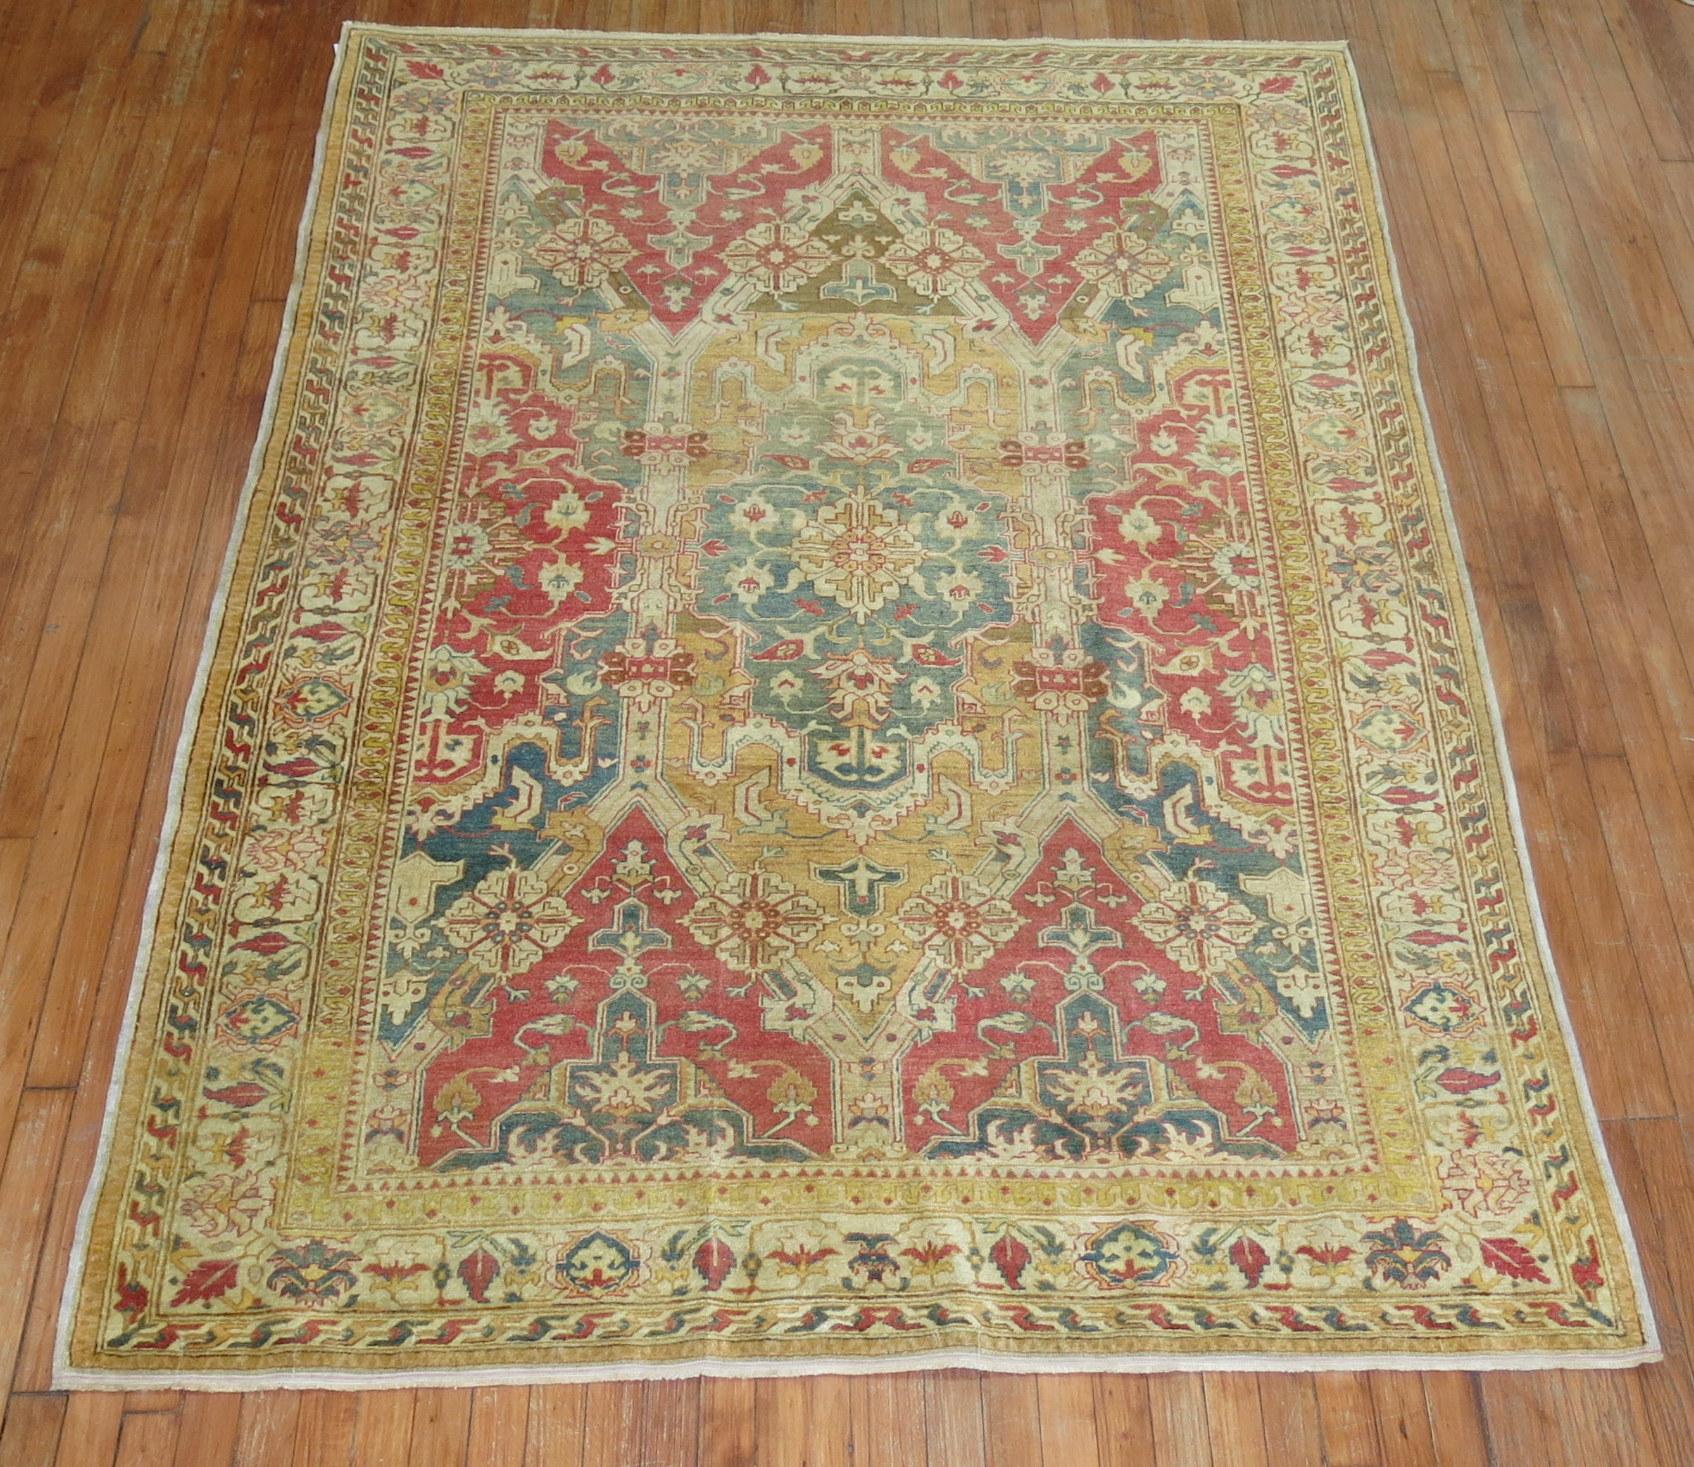 A very finely hand-knotted truly divine formal Turkish Sivas rug from the early 20th century with a large-scale masculine design in gold, green and pinky red accent colors. Very unusual design and border.

Measures: 5'6'' x 7'6''.